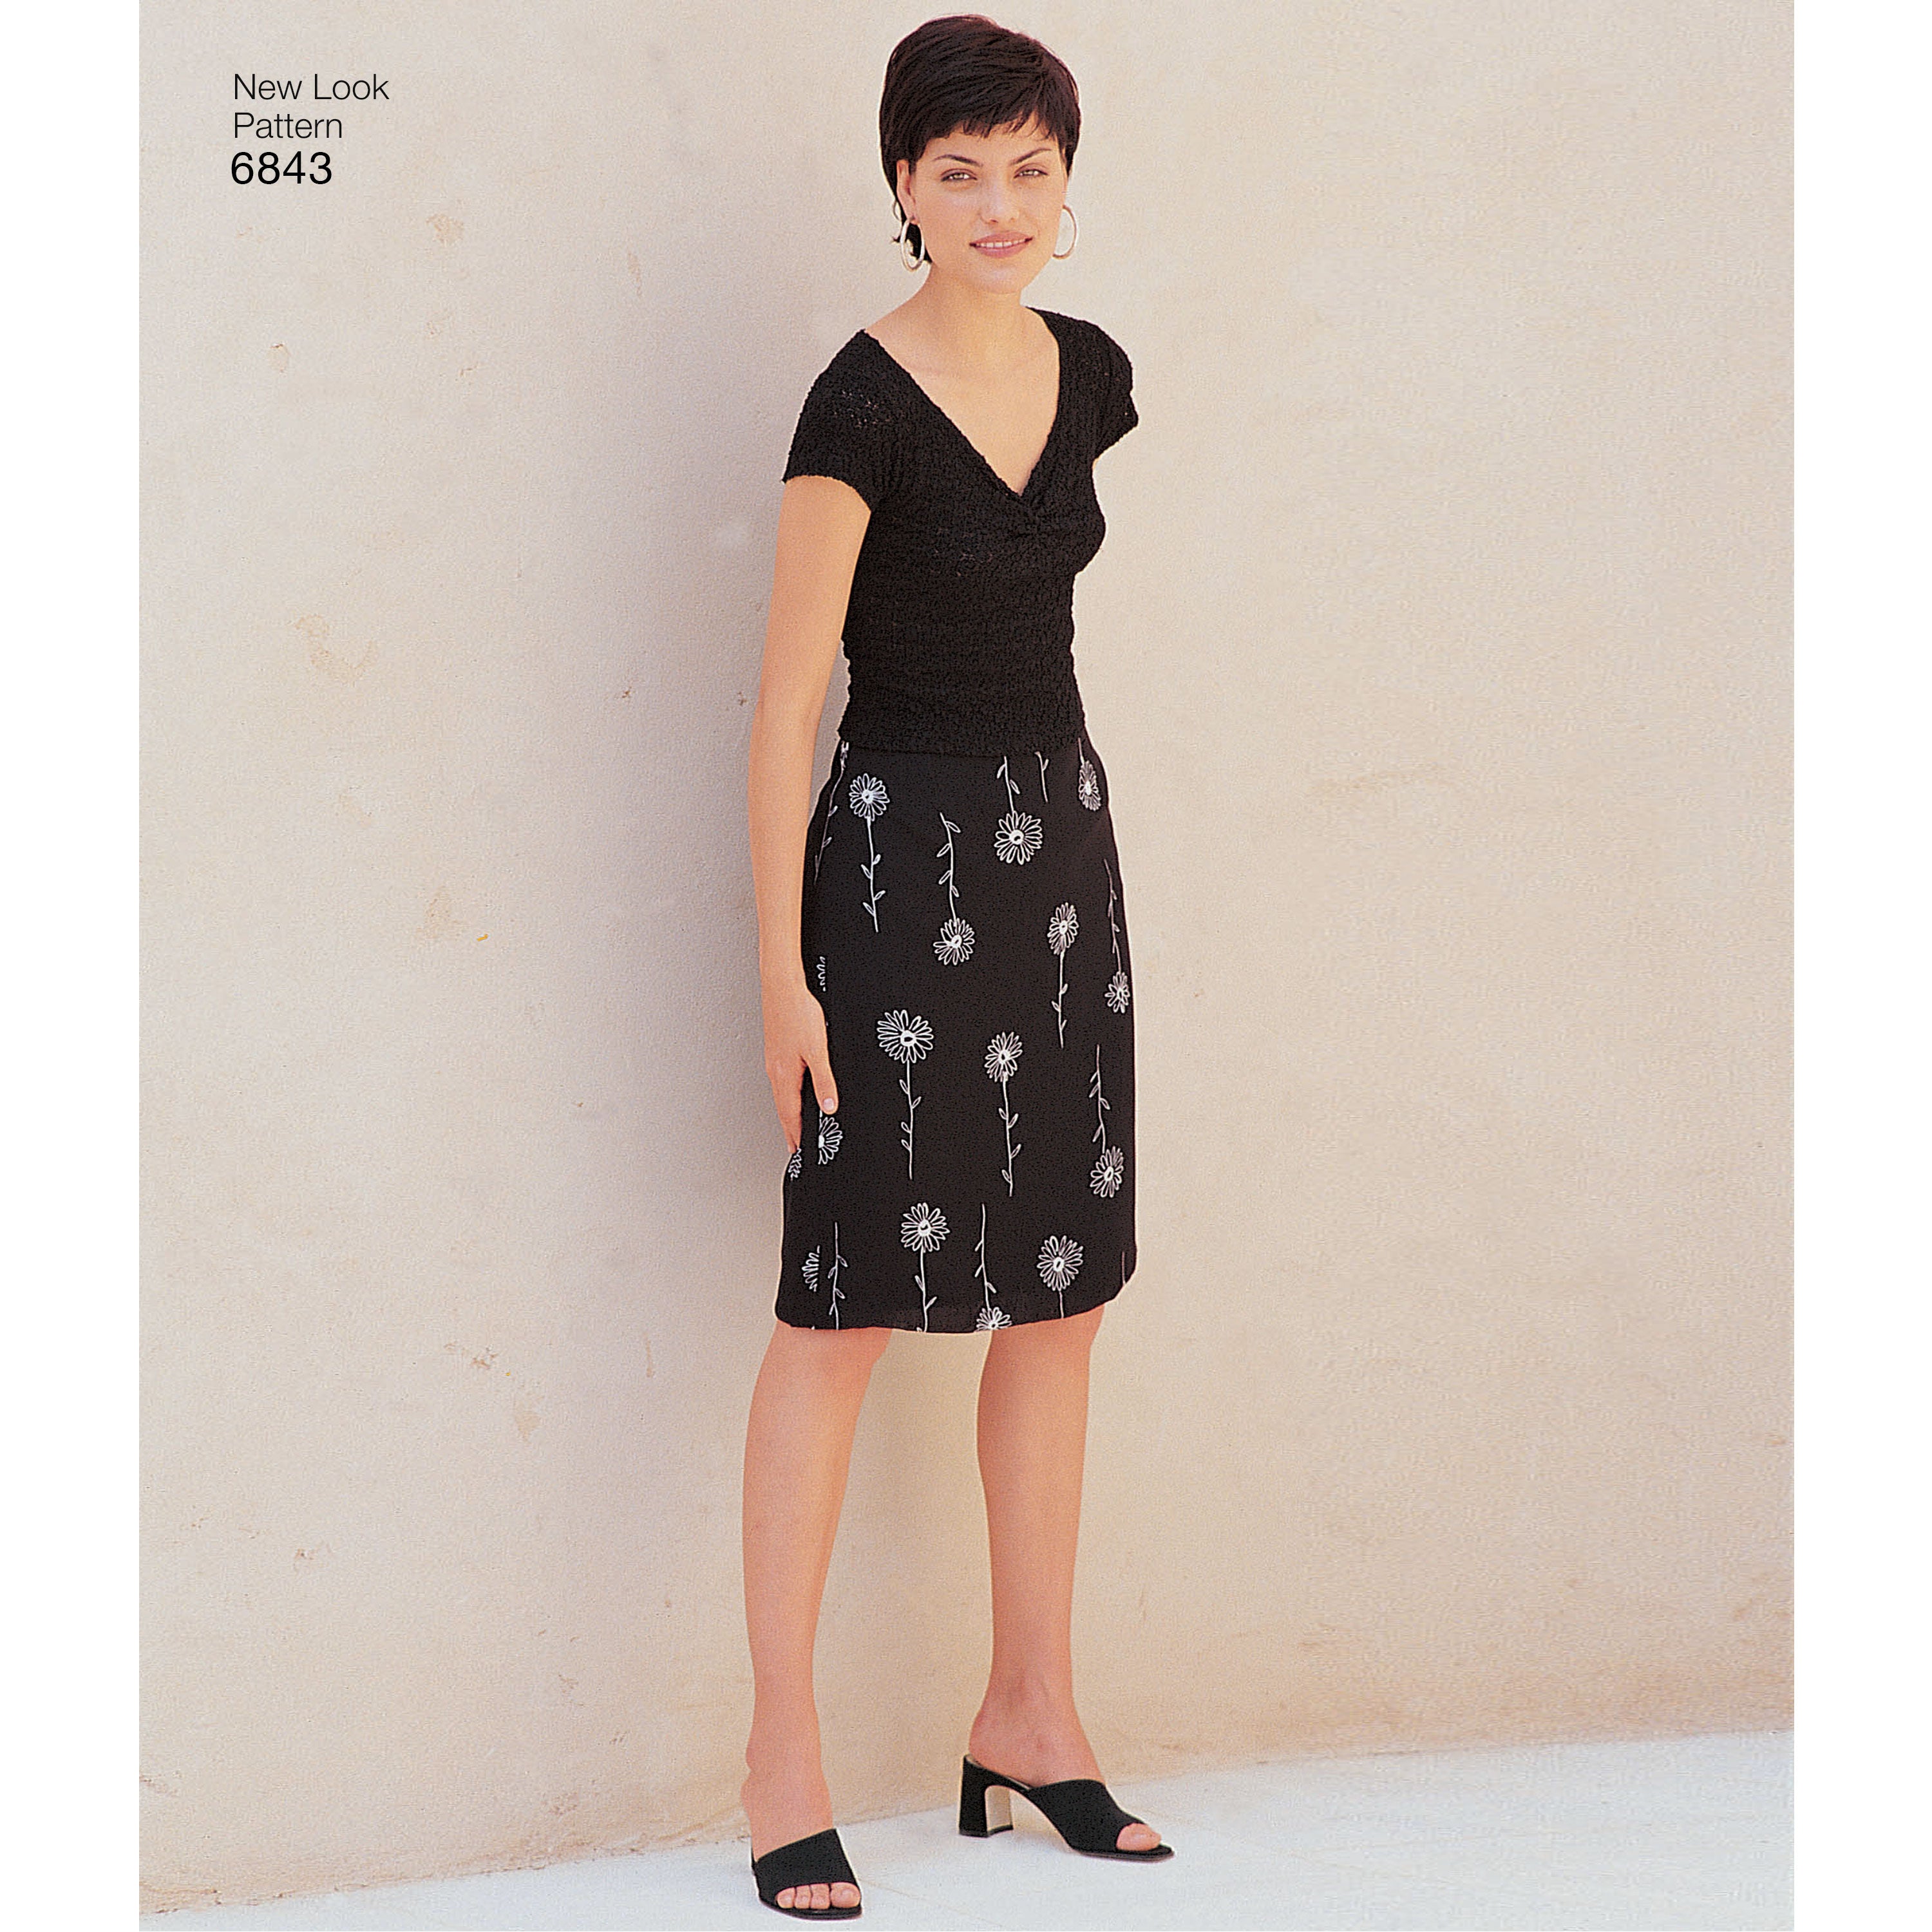 NL6843 Misses Skirt Pattern | Easy from Jaycotts Sewing Supplies